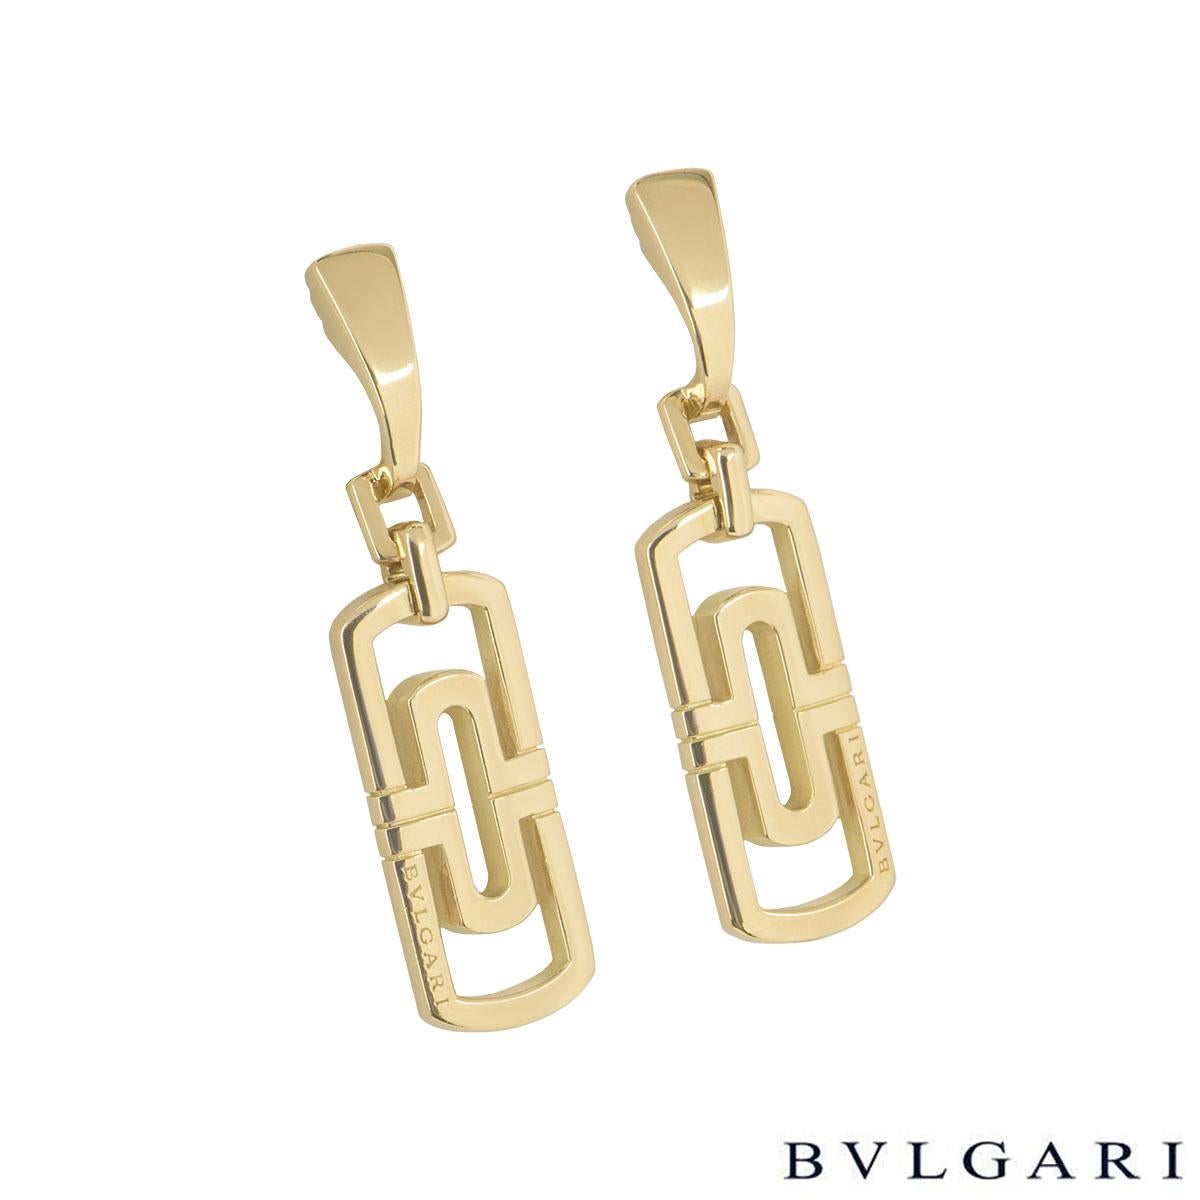 A pair of 18k yellow gold Bvlgari drop earrings from the Parentesi collection. The earrings comprise of the iconic Parentesi motif and feature post and hinge clip fittings. The earrings measure 4cm in length and 1.1cm in width and have a gross